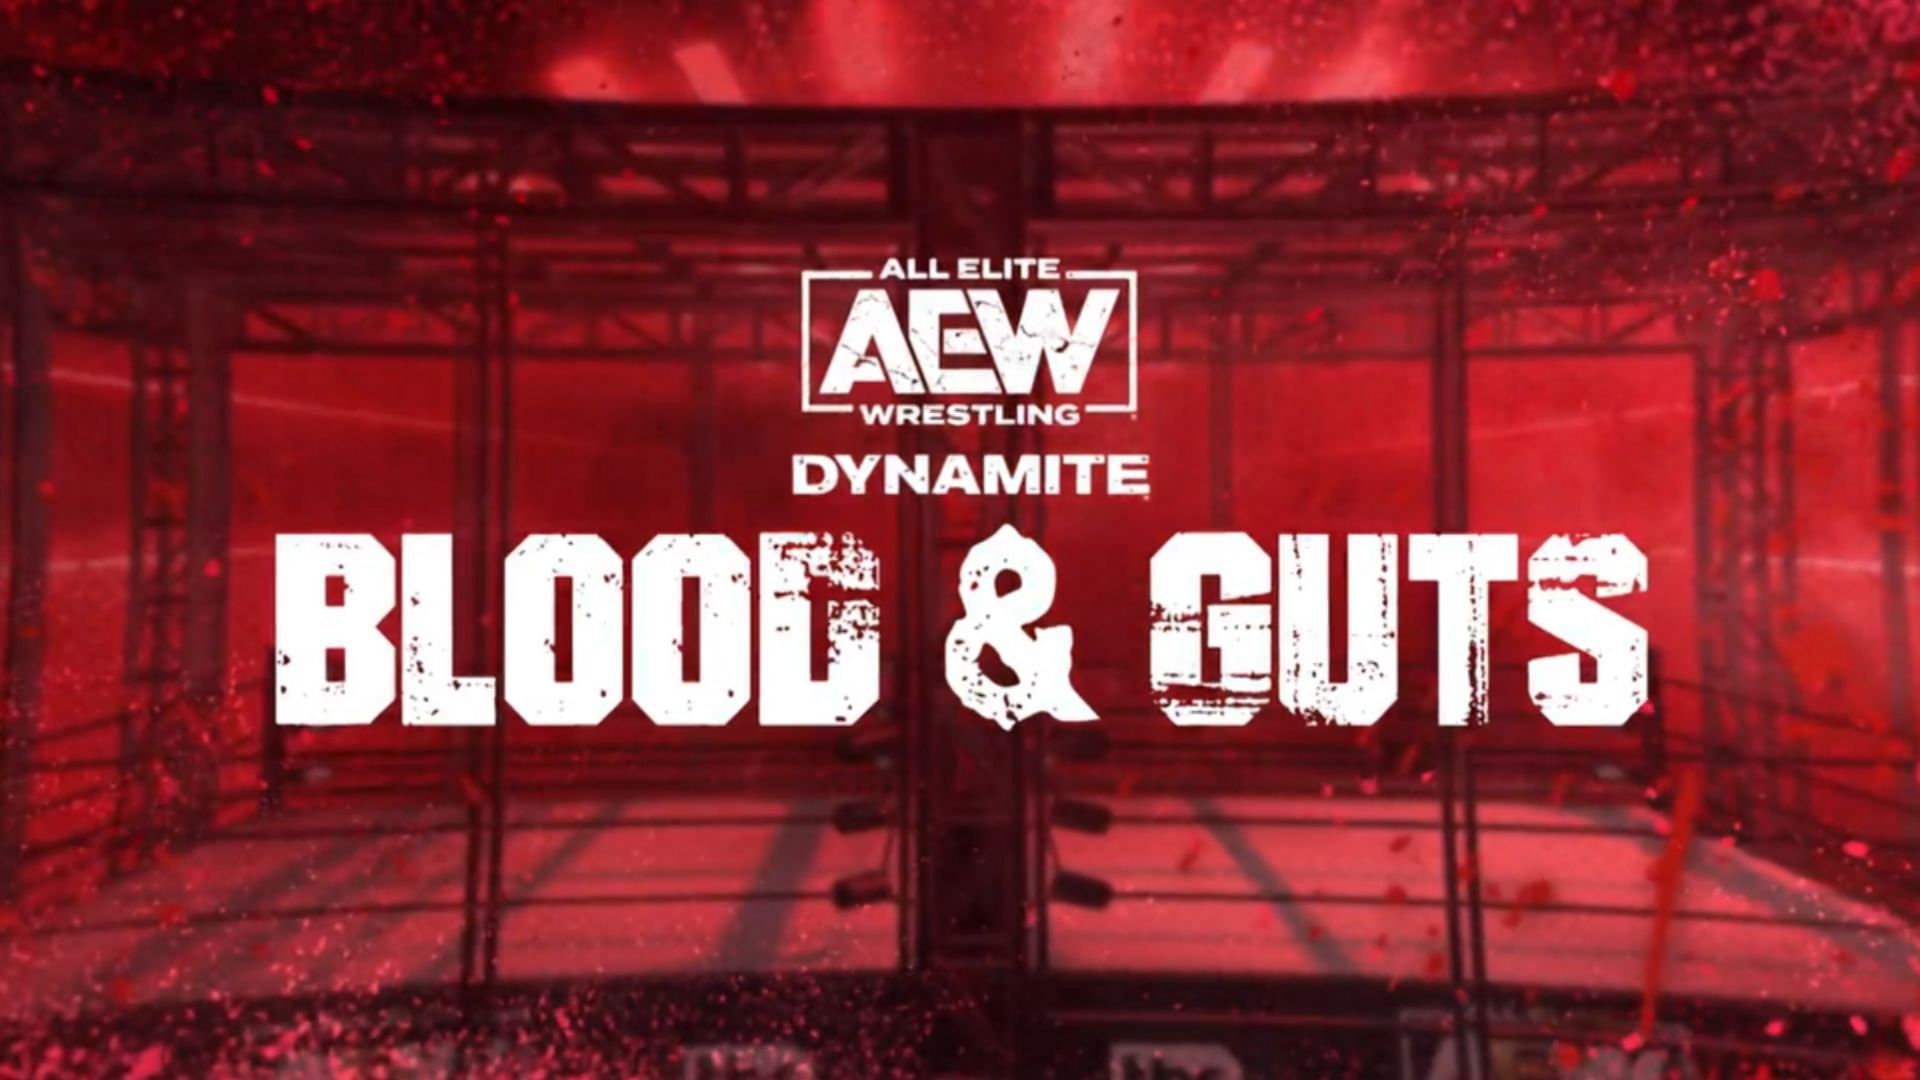 Find out which AEW top star wants to have women